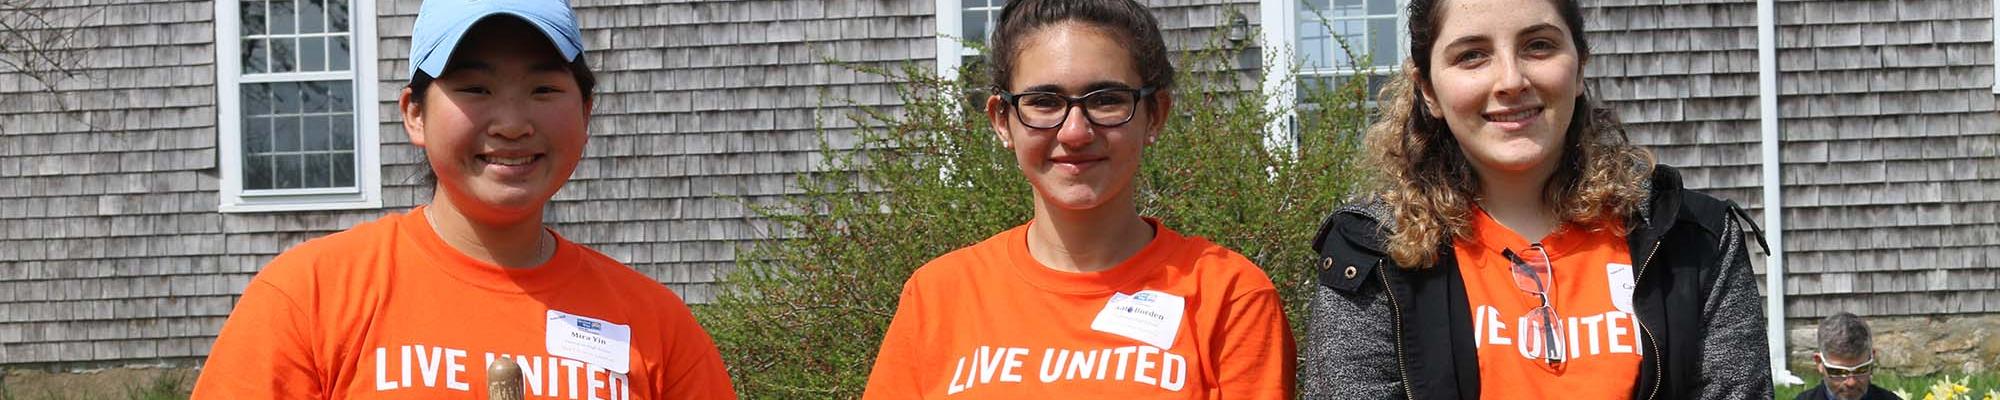 United Way of Greater New Bedford is kicking off National Volunteer Week April 17-23 with the award of $27,500 in Changemaker Grants to 14 all-volunteer groups